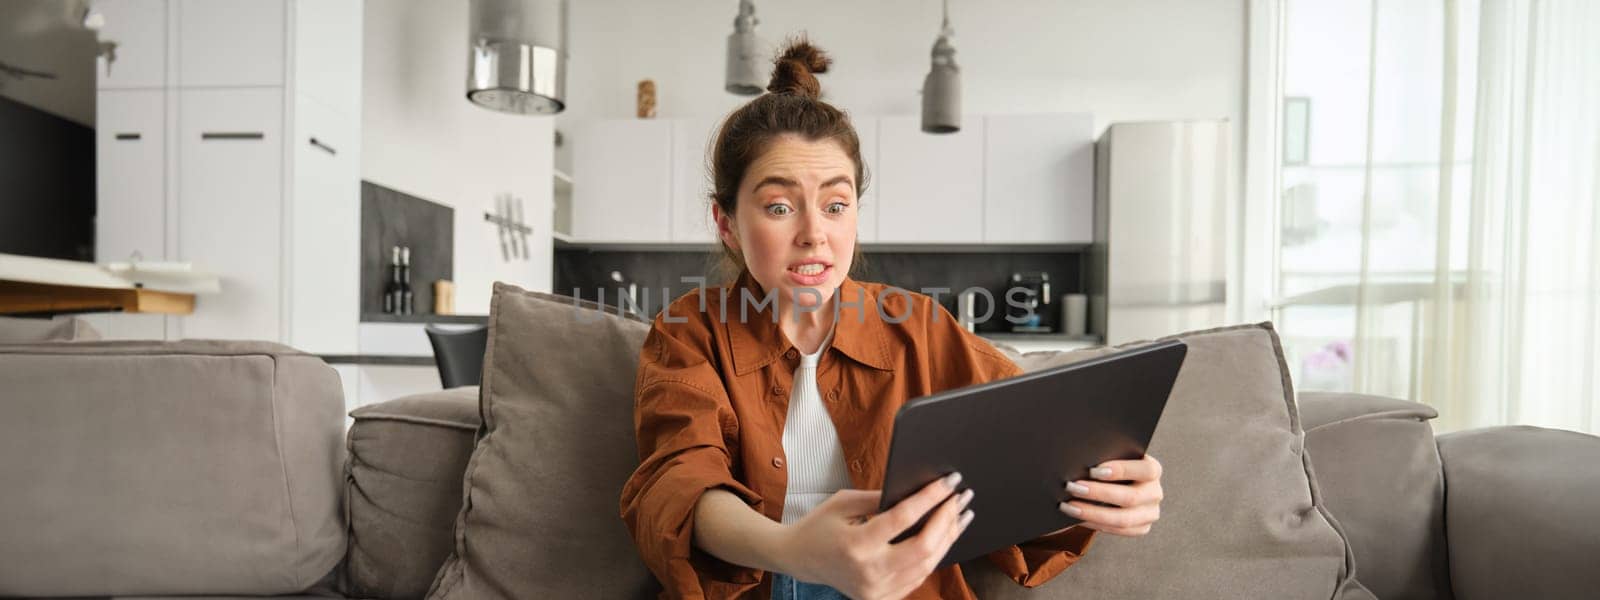 Portrait of anxious, stressed young woman looking scared at digital tablet, staring at screen, sitting on couch with gadget in living room.